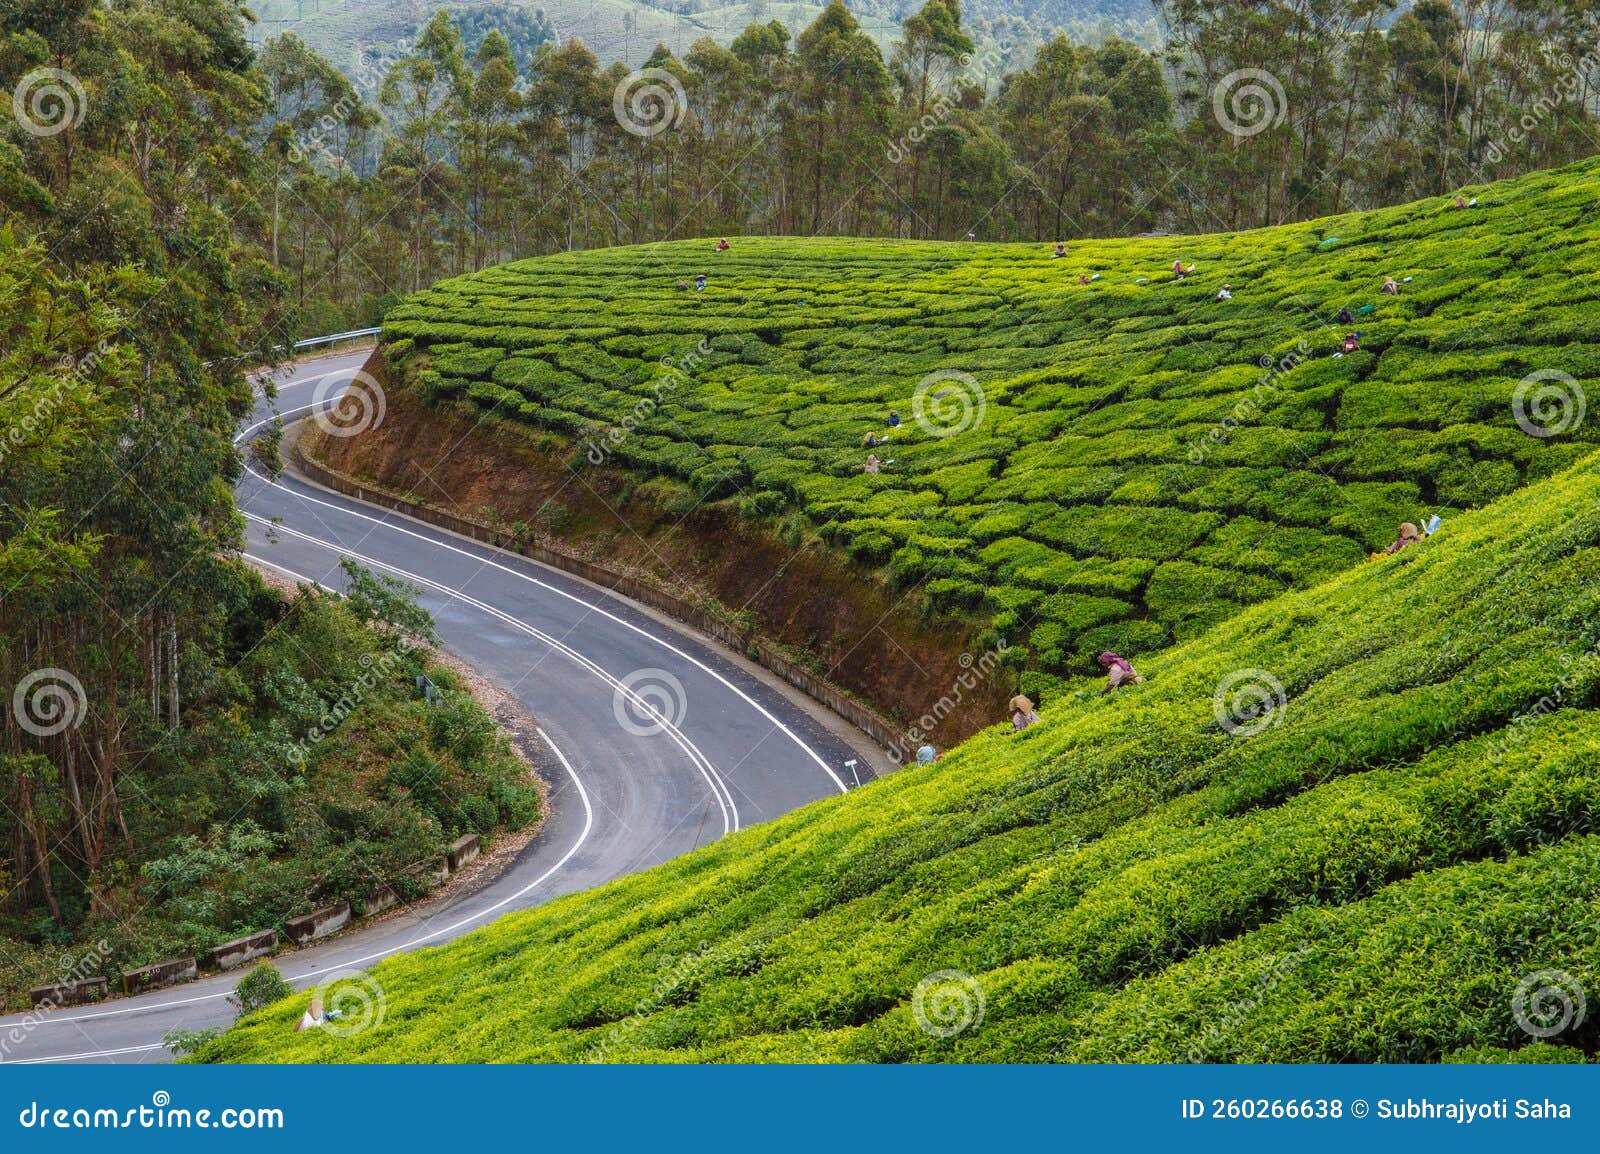 a winding road on the periphery of a tea garden